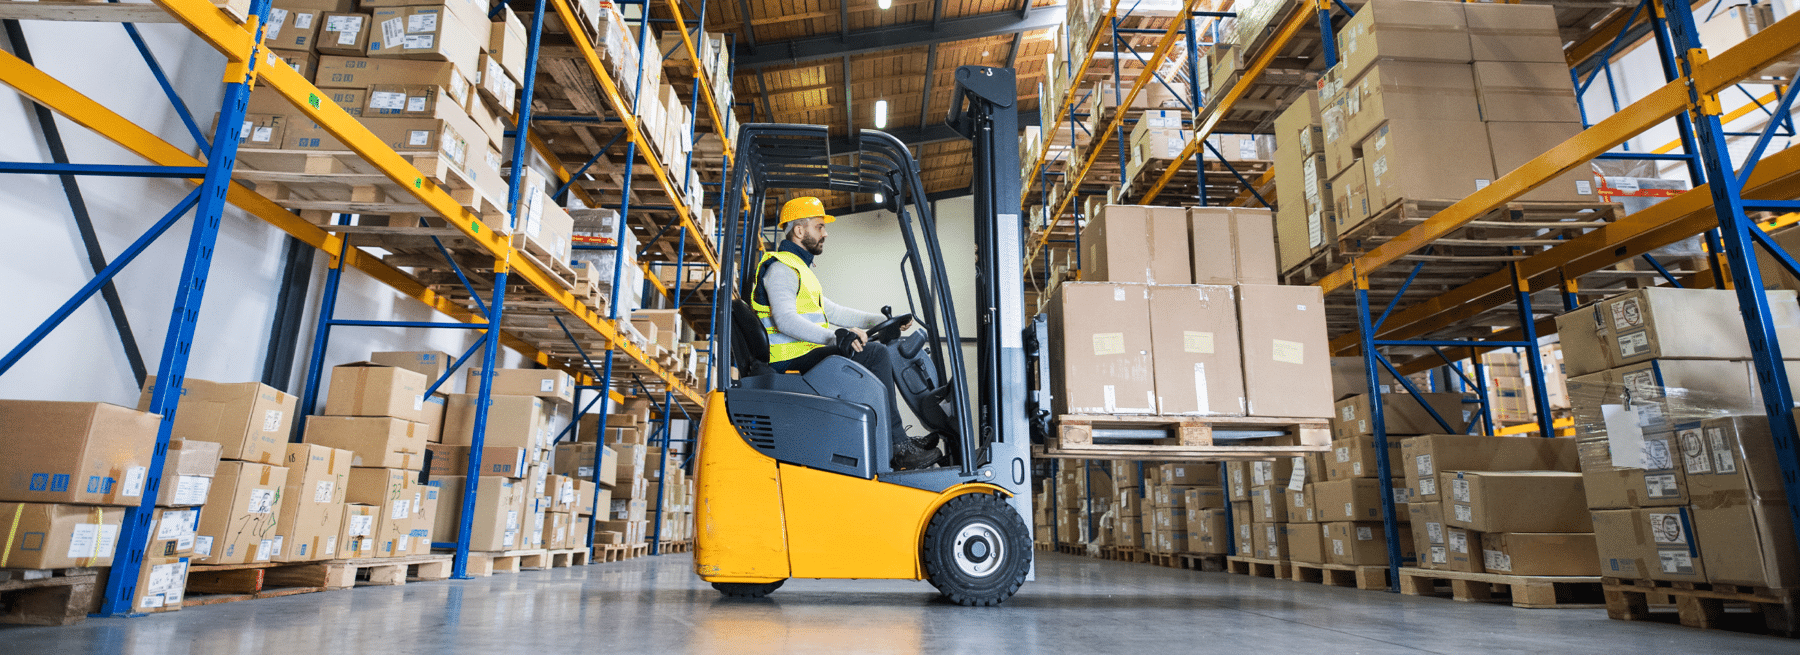 Technology for warehouse safety